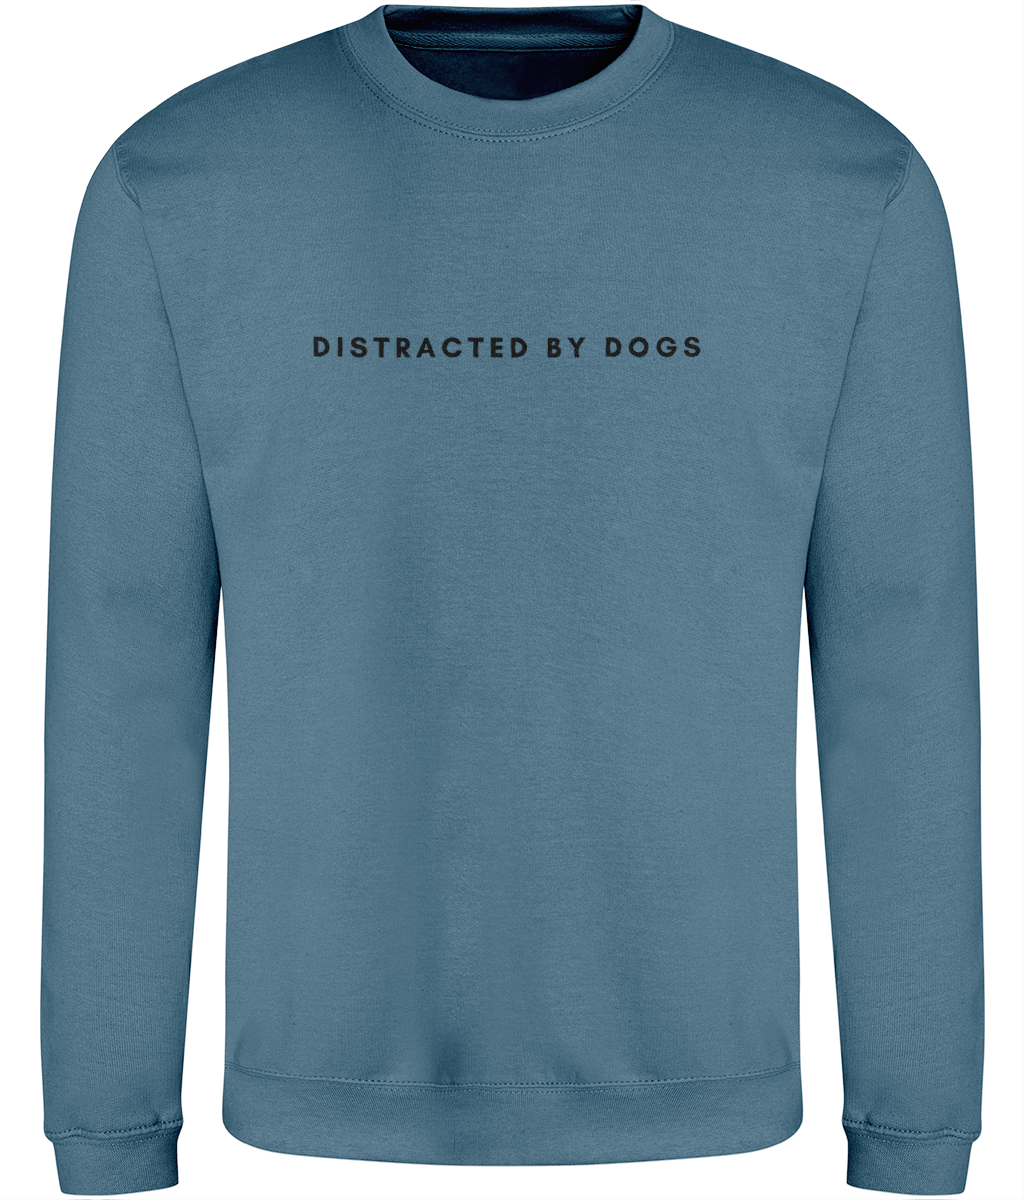 Distracted by dogs sweatshirt